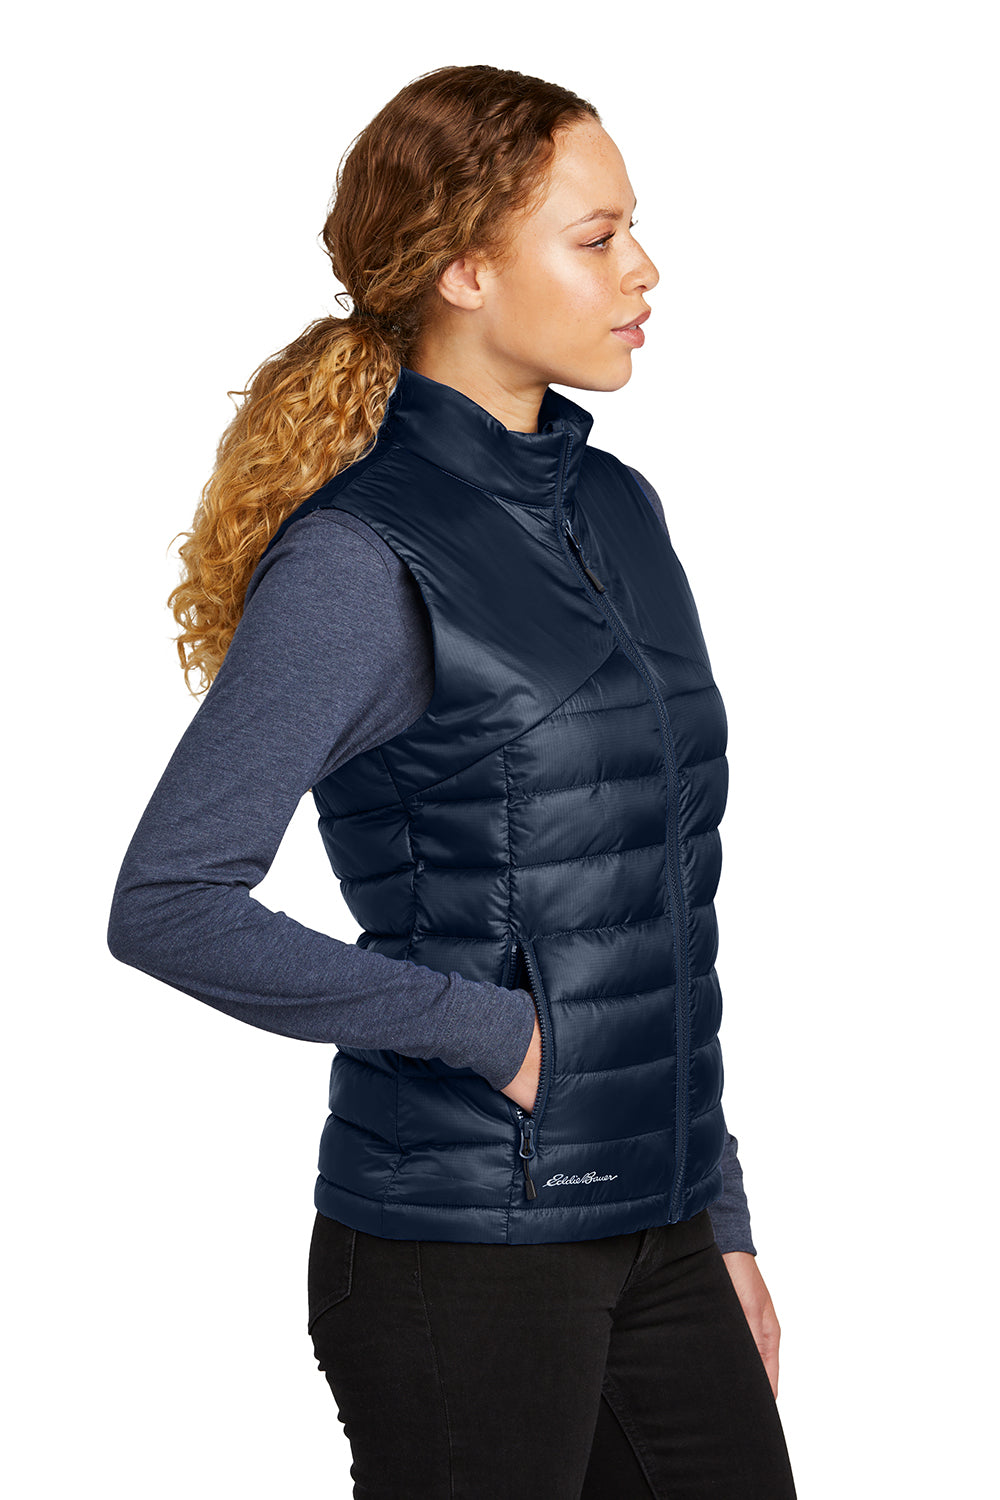 Eddie Bauer EB513 Womens Water Resistant Quilted Full Zip Vest River Navy Blue Model Side